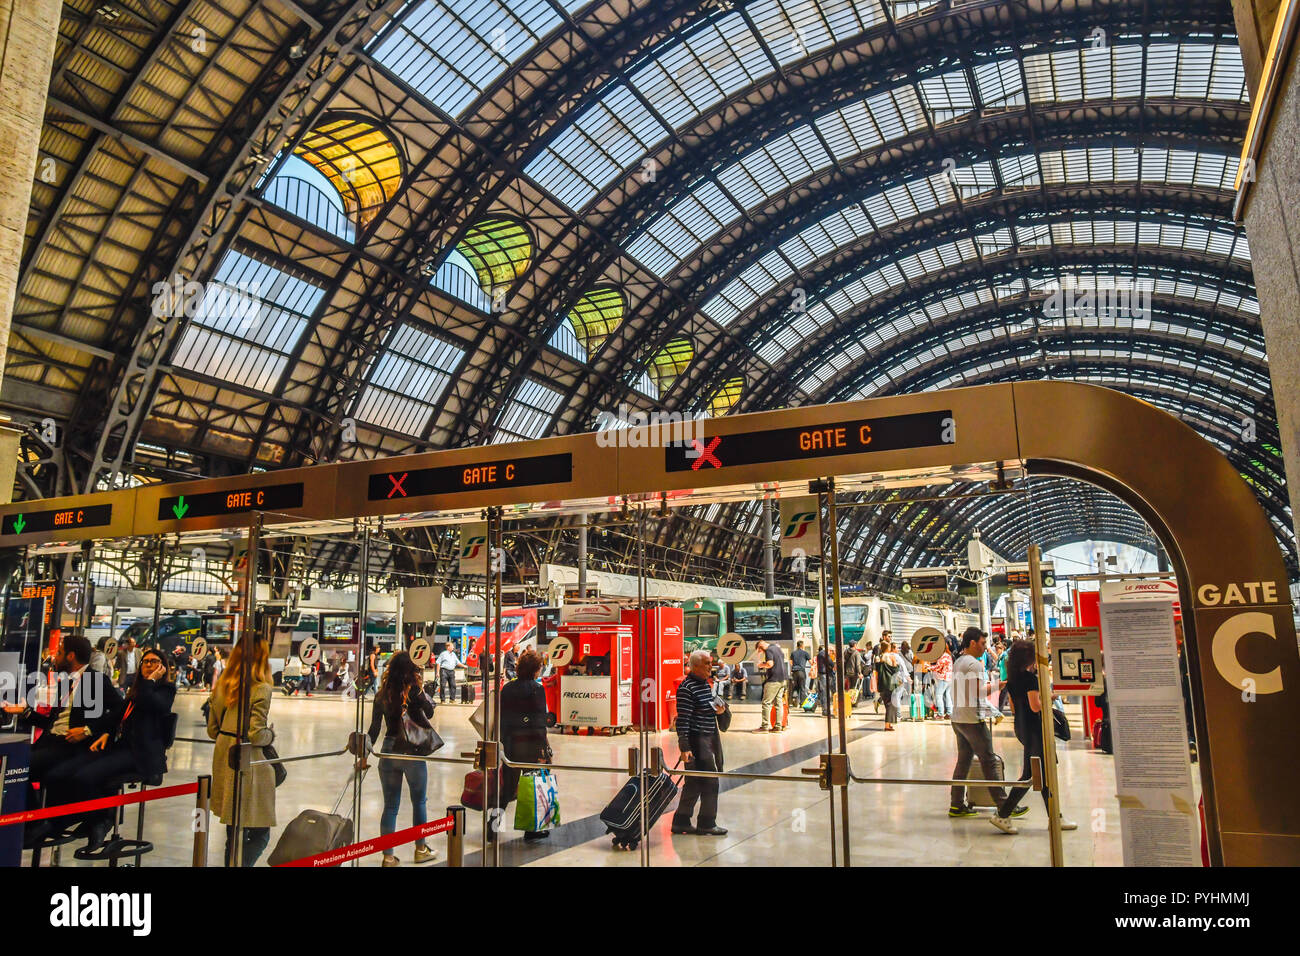 Milan Central Station Stazione Centrale Interiors with Trains and People  Stock Photo - Alamy